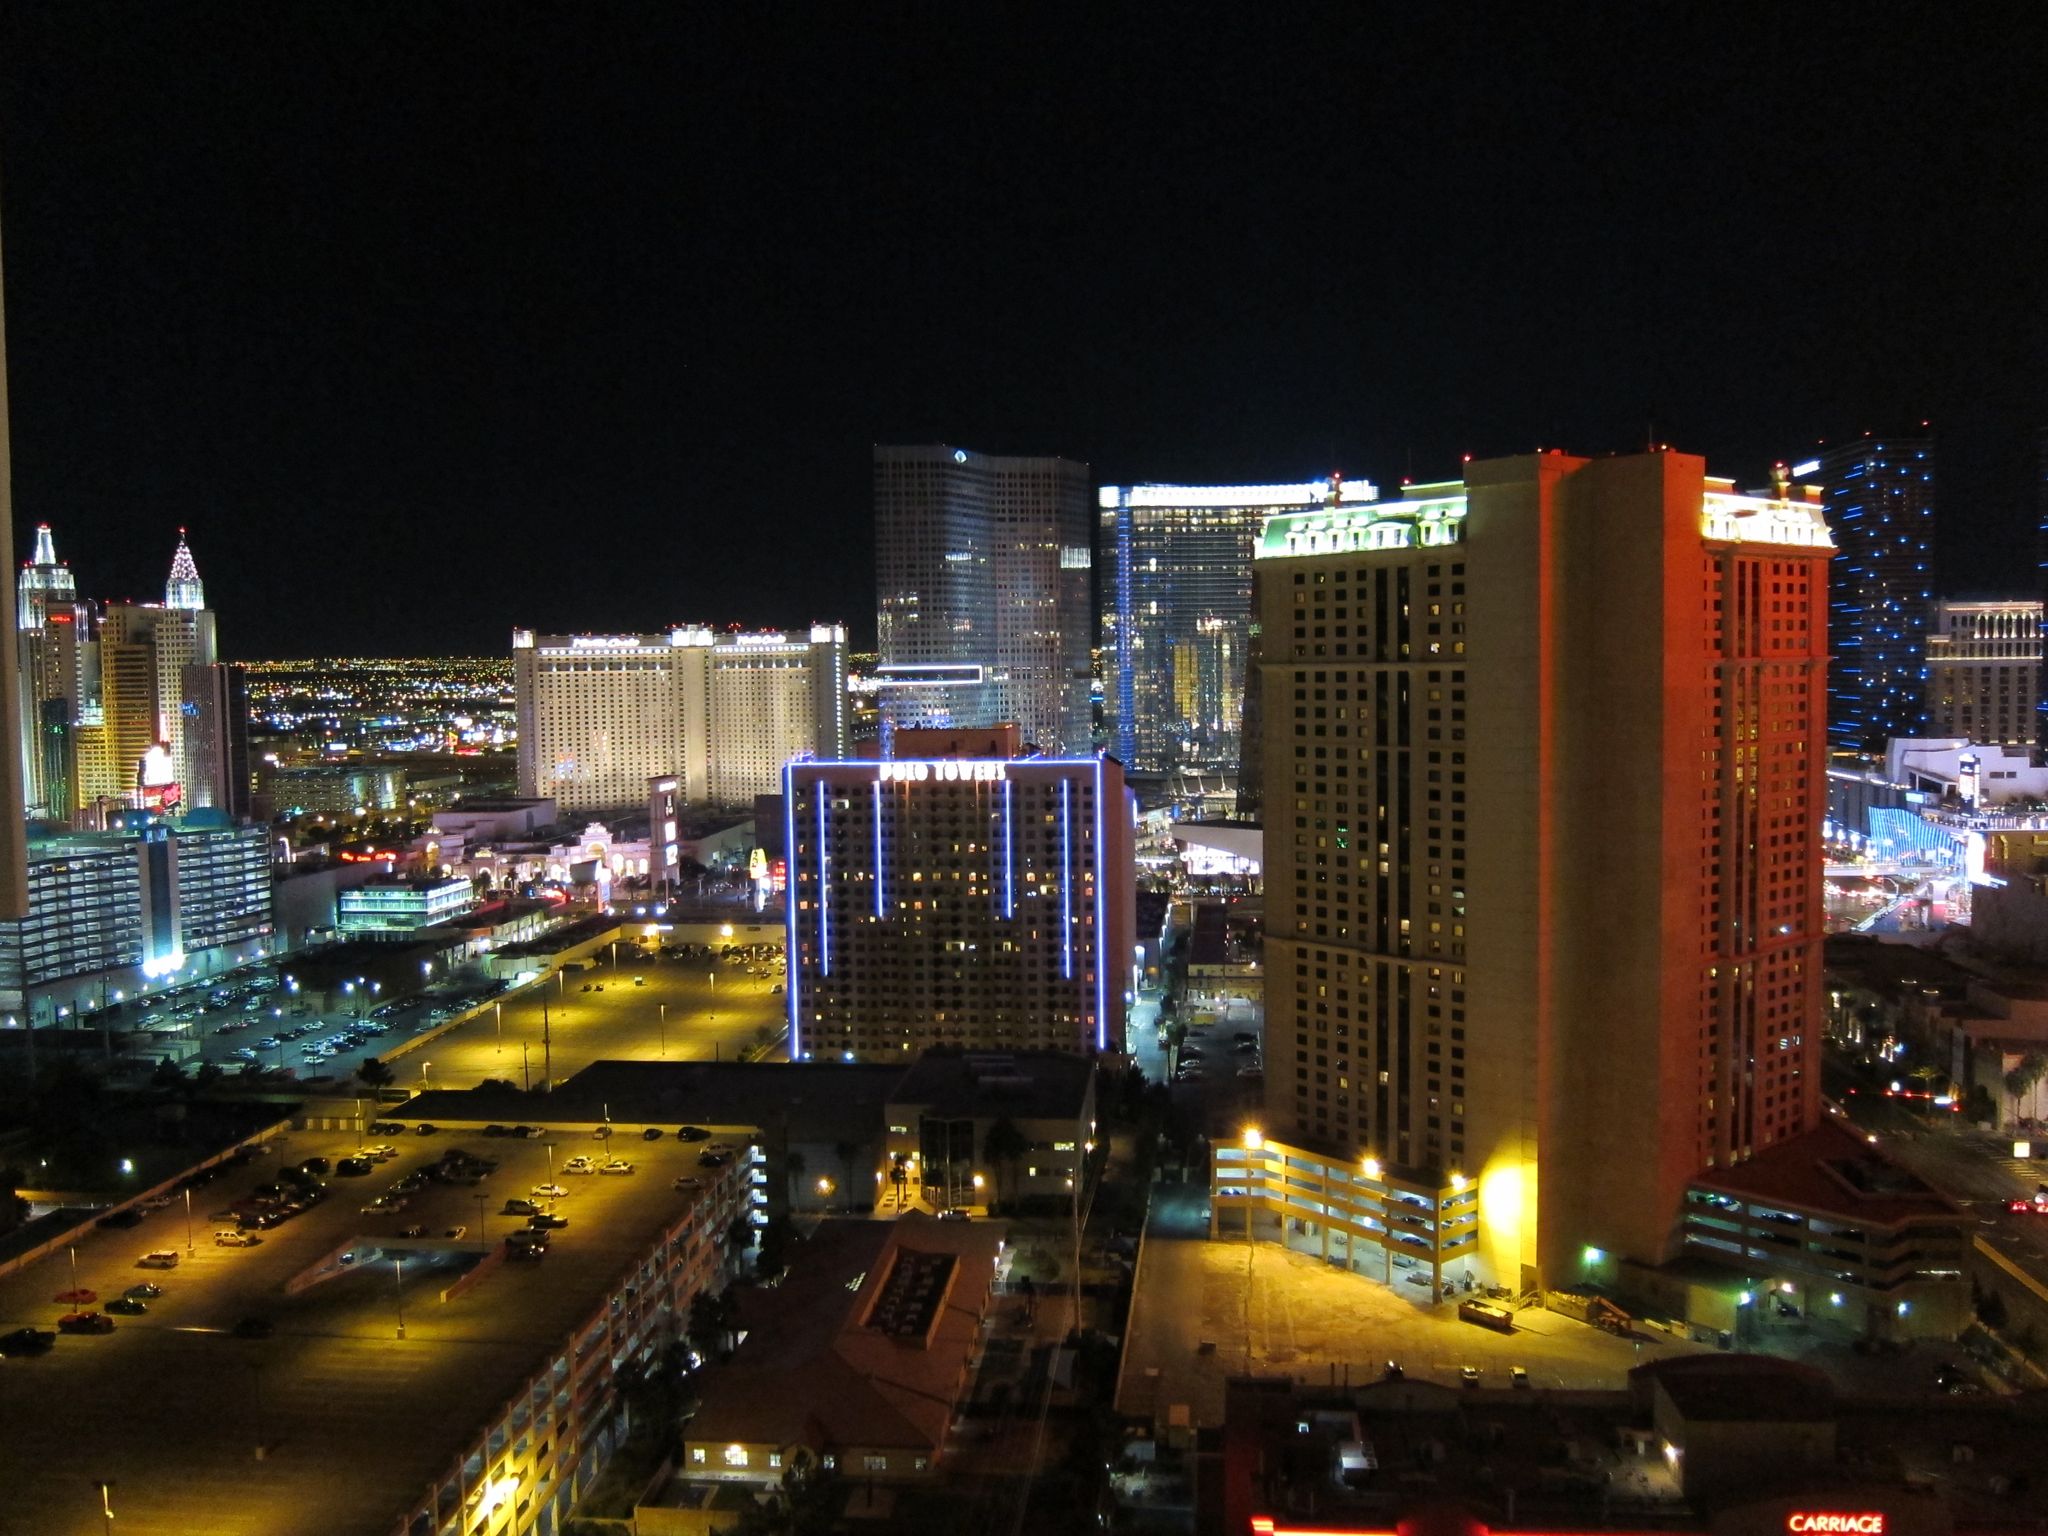 Photo 33 of 44 from the album Highlights Las Vegas 2011.